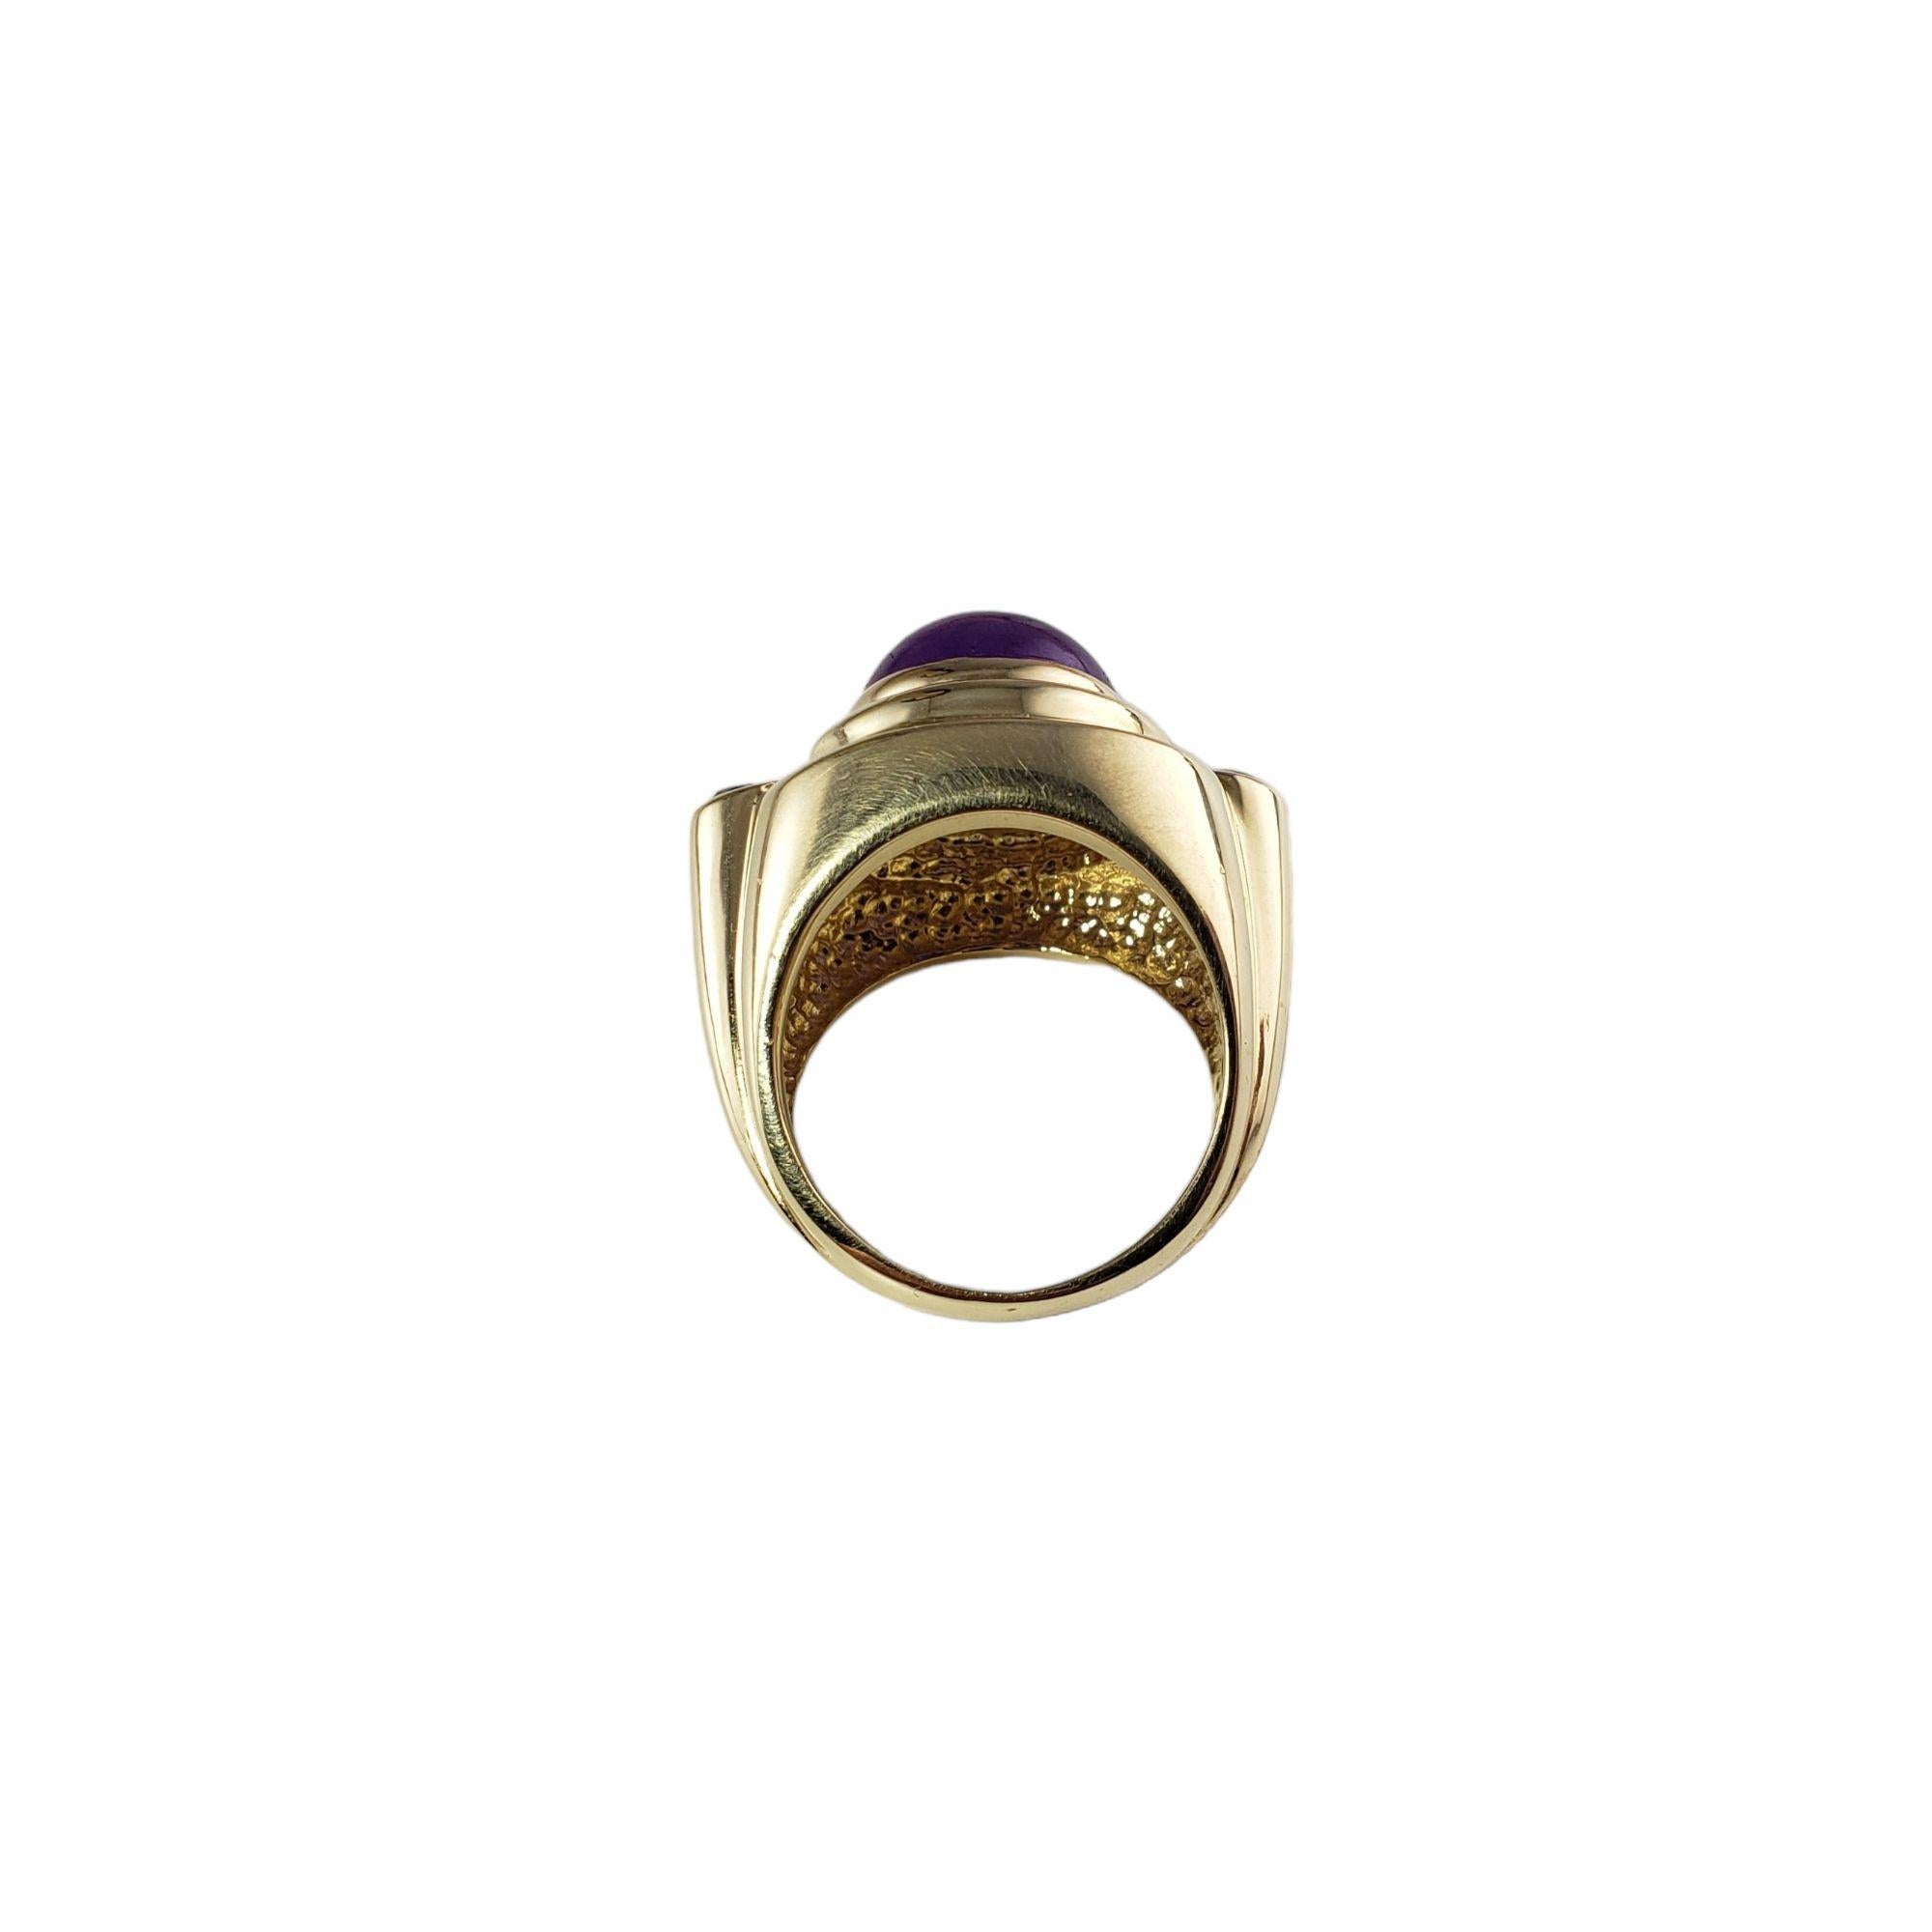 Vintage 14 Karat Yellow Gold Amethyst and Blue Topaz Ring Size 5.5 JAGi Certified-

This stunning ring features one round cabochon cut amethyst (10.6 mm) and two round blue topaz stones set in beautifully detailed 14K yellow gold. Width: 16 mm.